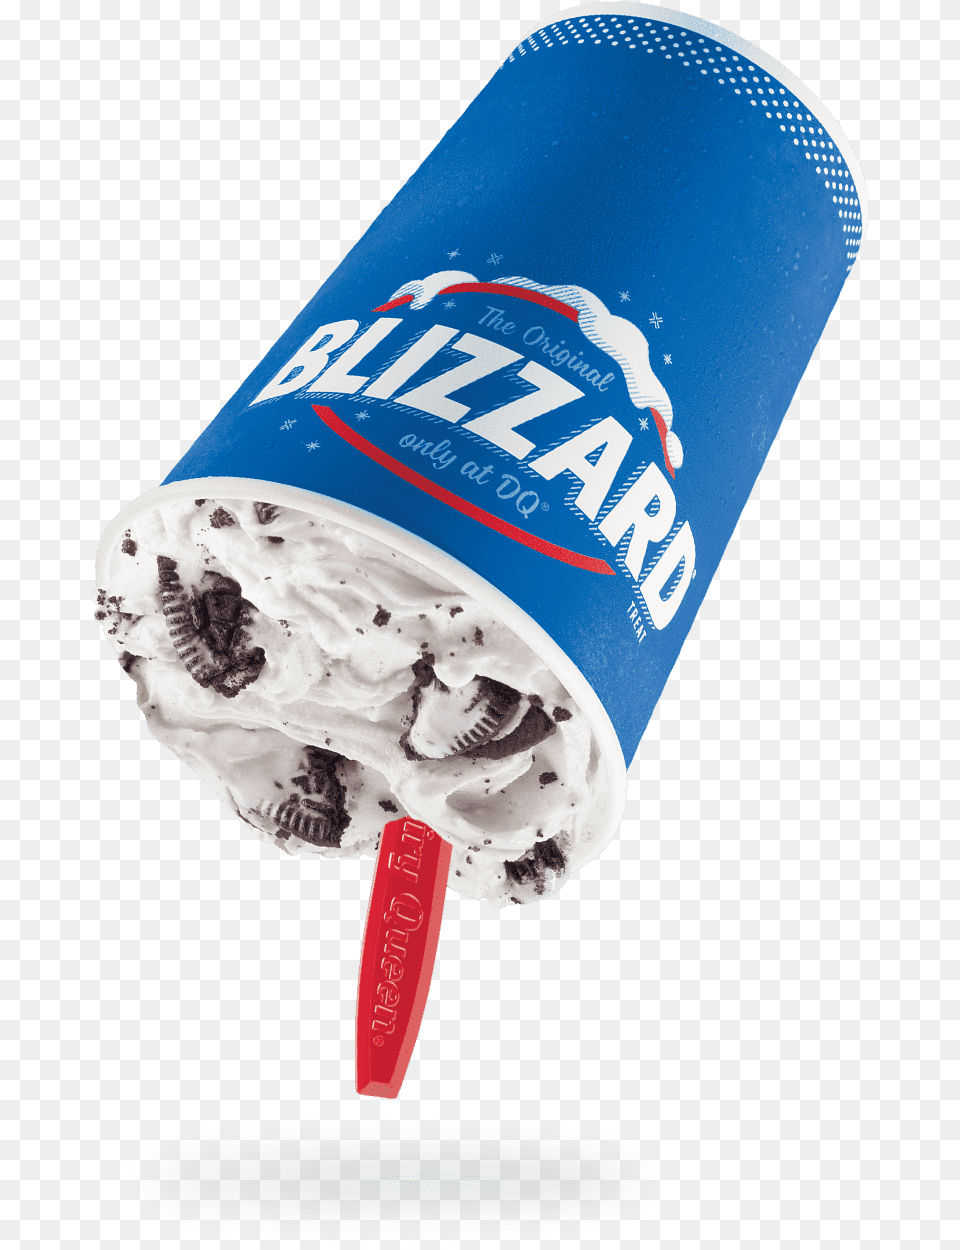 Oreo Cookie Blizzard Treat Dairy Queen Menu Dairy Queen Oreo Blizzard, Cream, Dessert, Food, Ice Cream Free Transparent Png